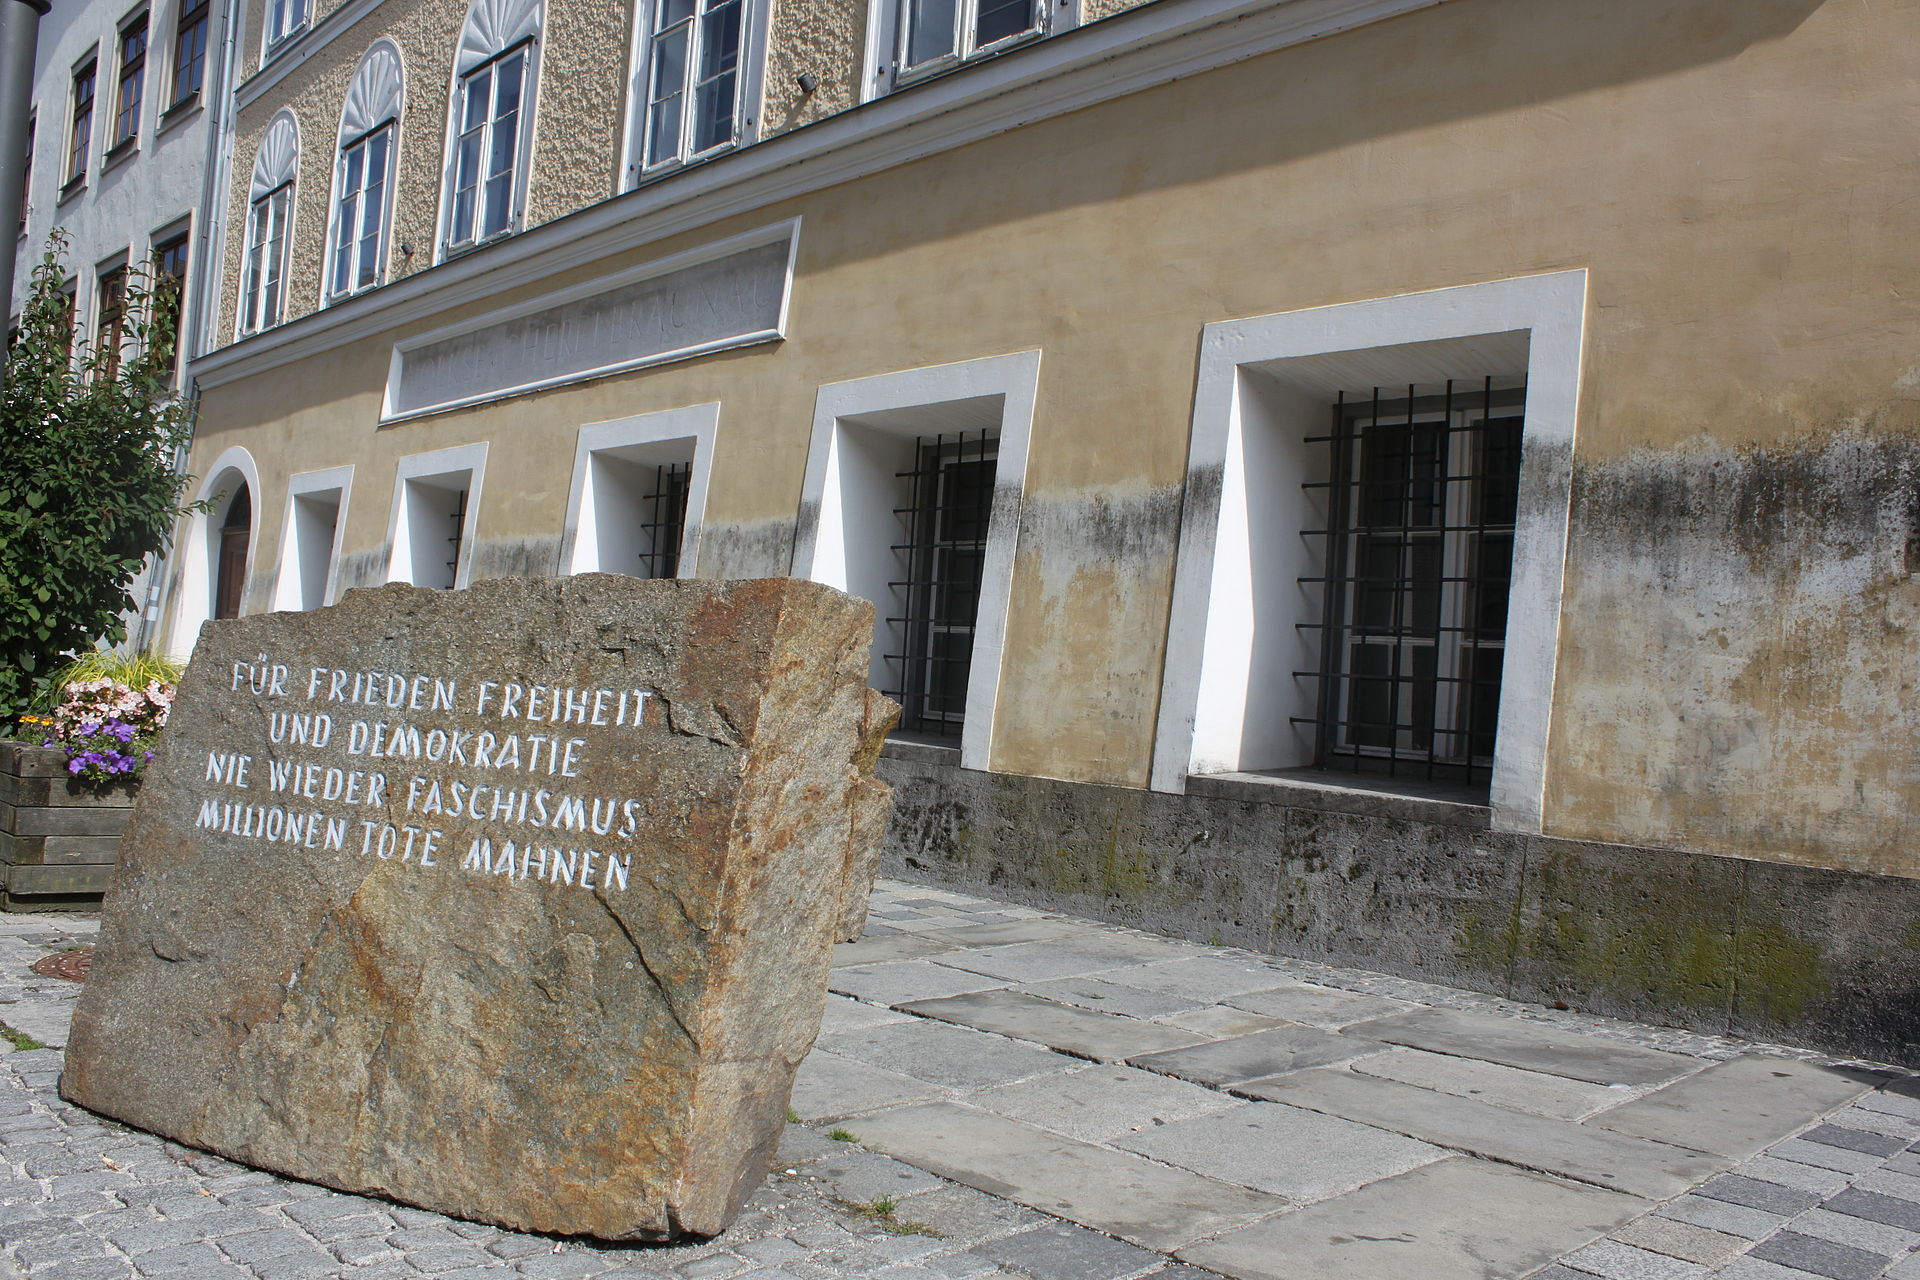 Where Hitler was born, a block of stone from the Mauthausen concentration camp. It reads 